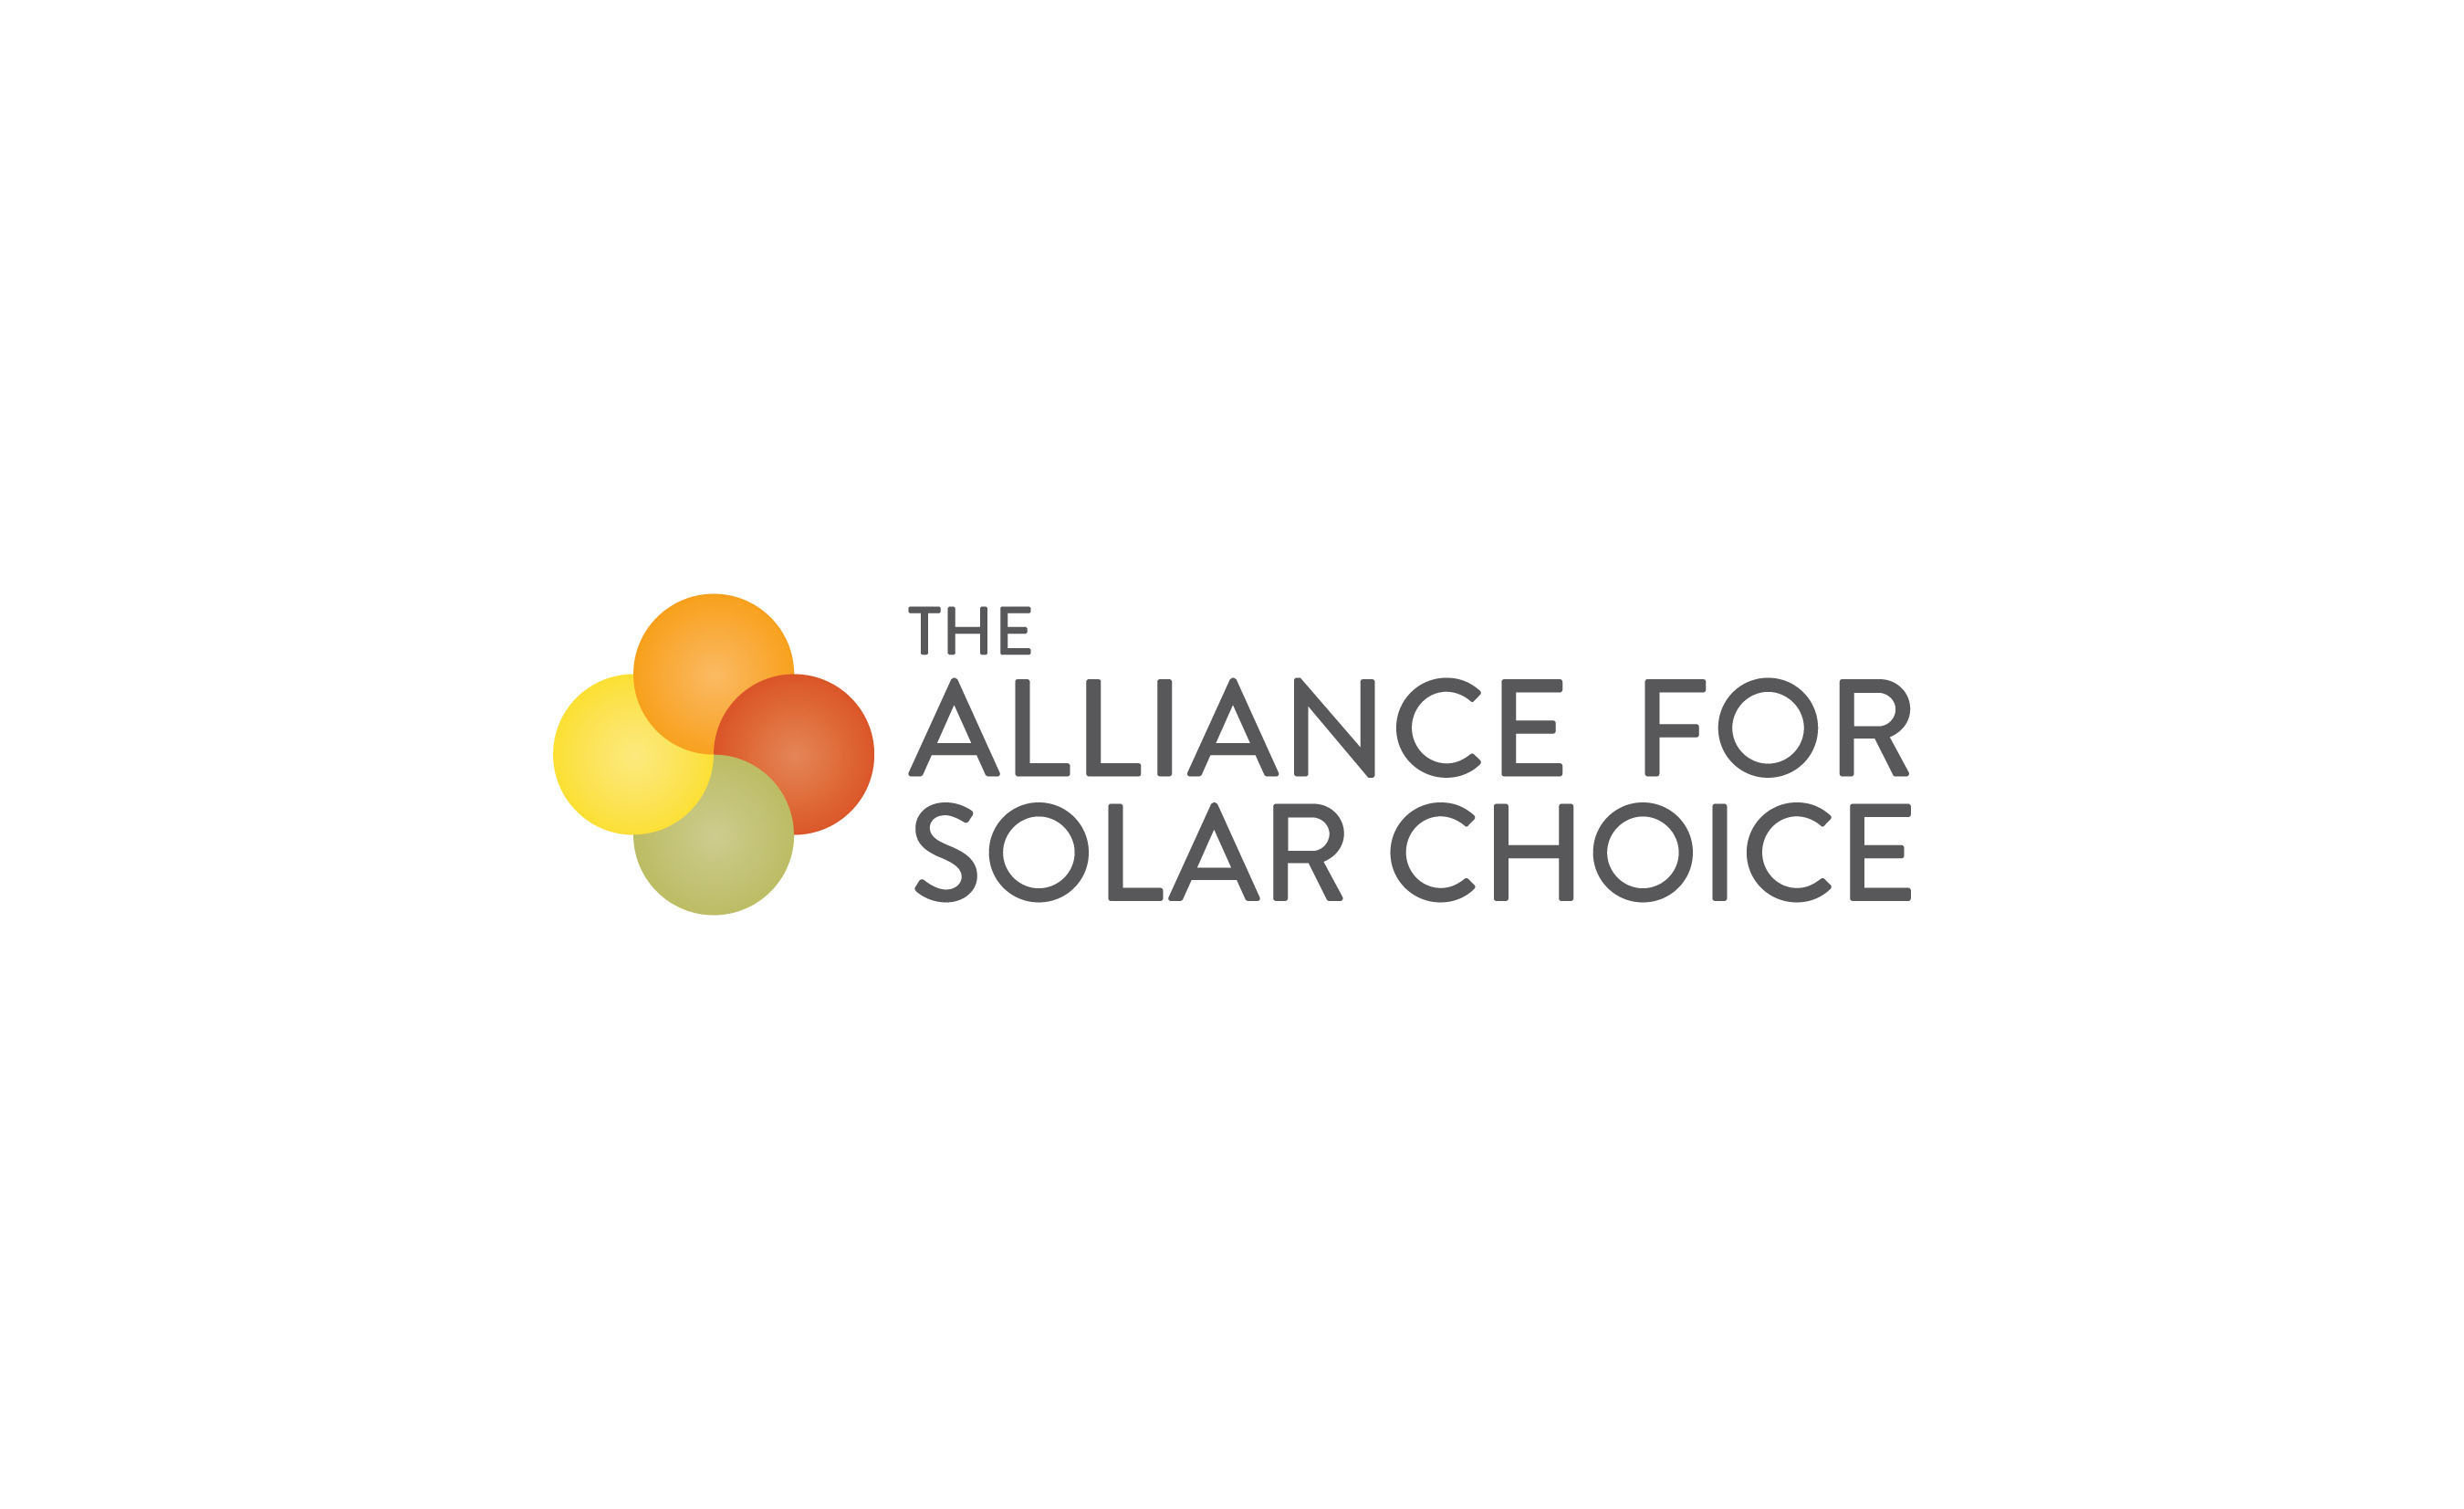 The Alliance for Solar Choice is a coalition of rooftop solar installers dedicated to protecting and promoting net energy metering. (PRNewsFoto/The Alliance for Solar Choice) (PRNewsFoto/THE ALLIANCE FOR SOLAR CHOICE)